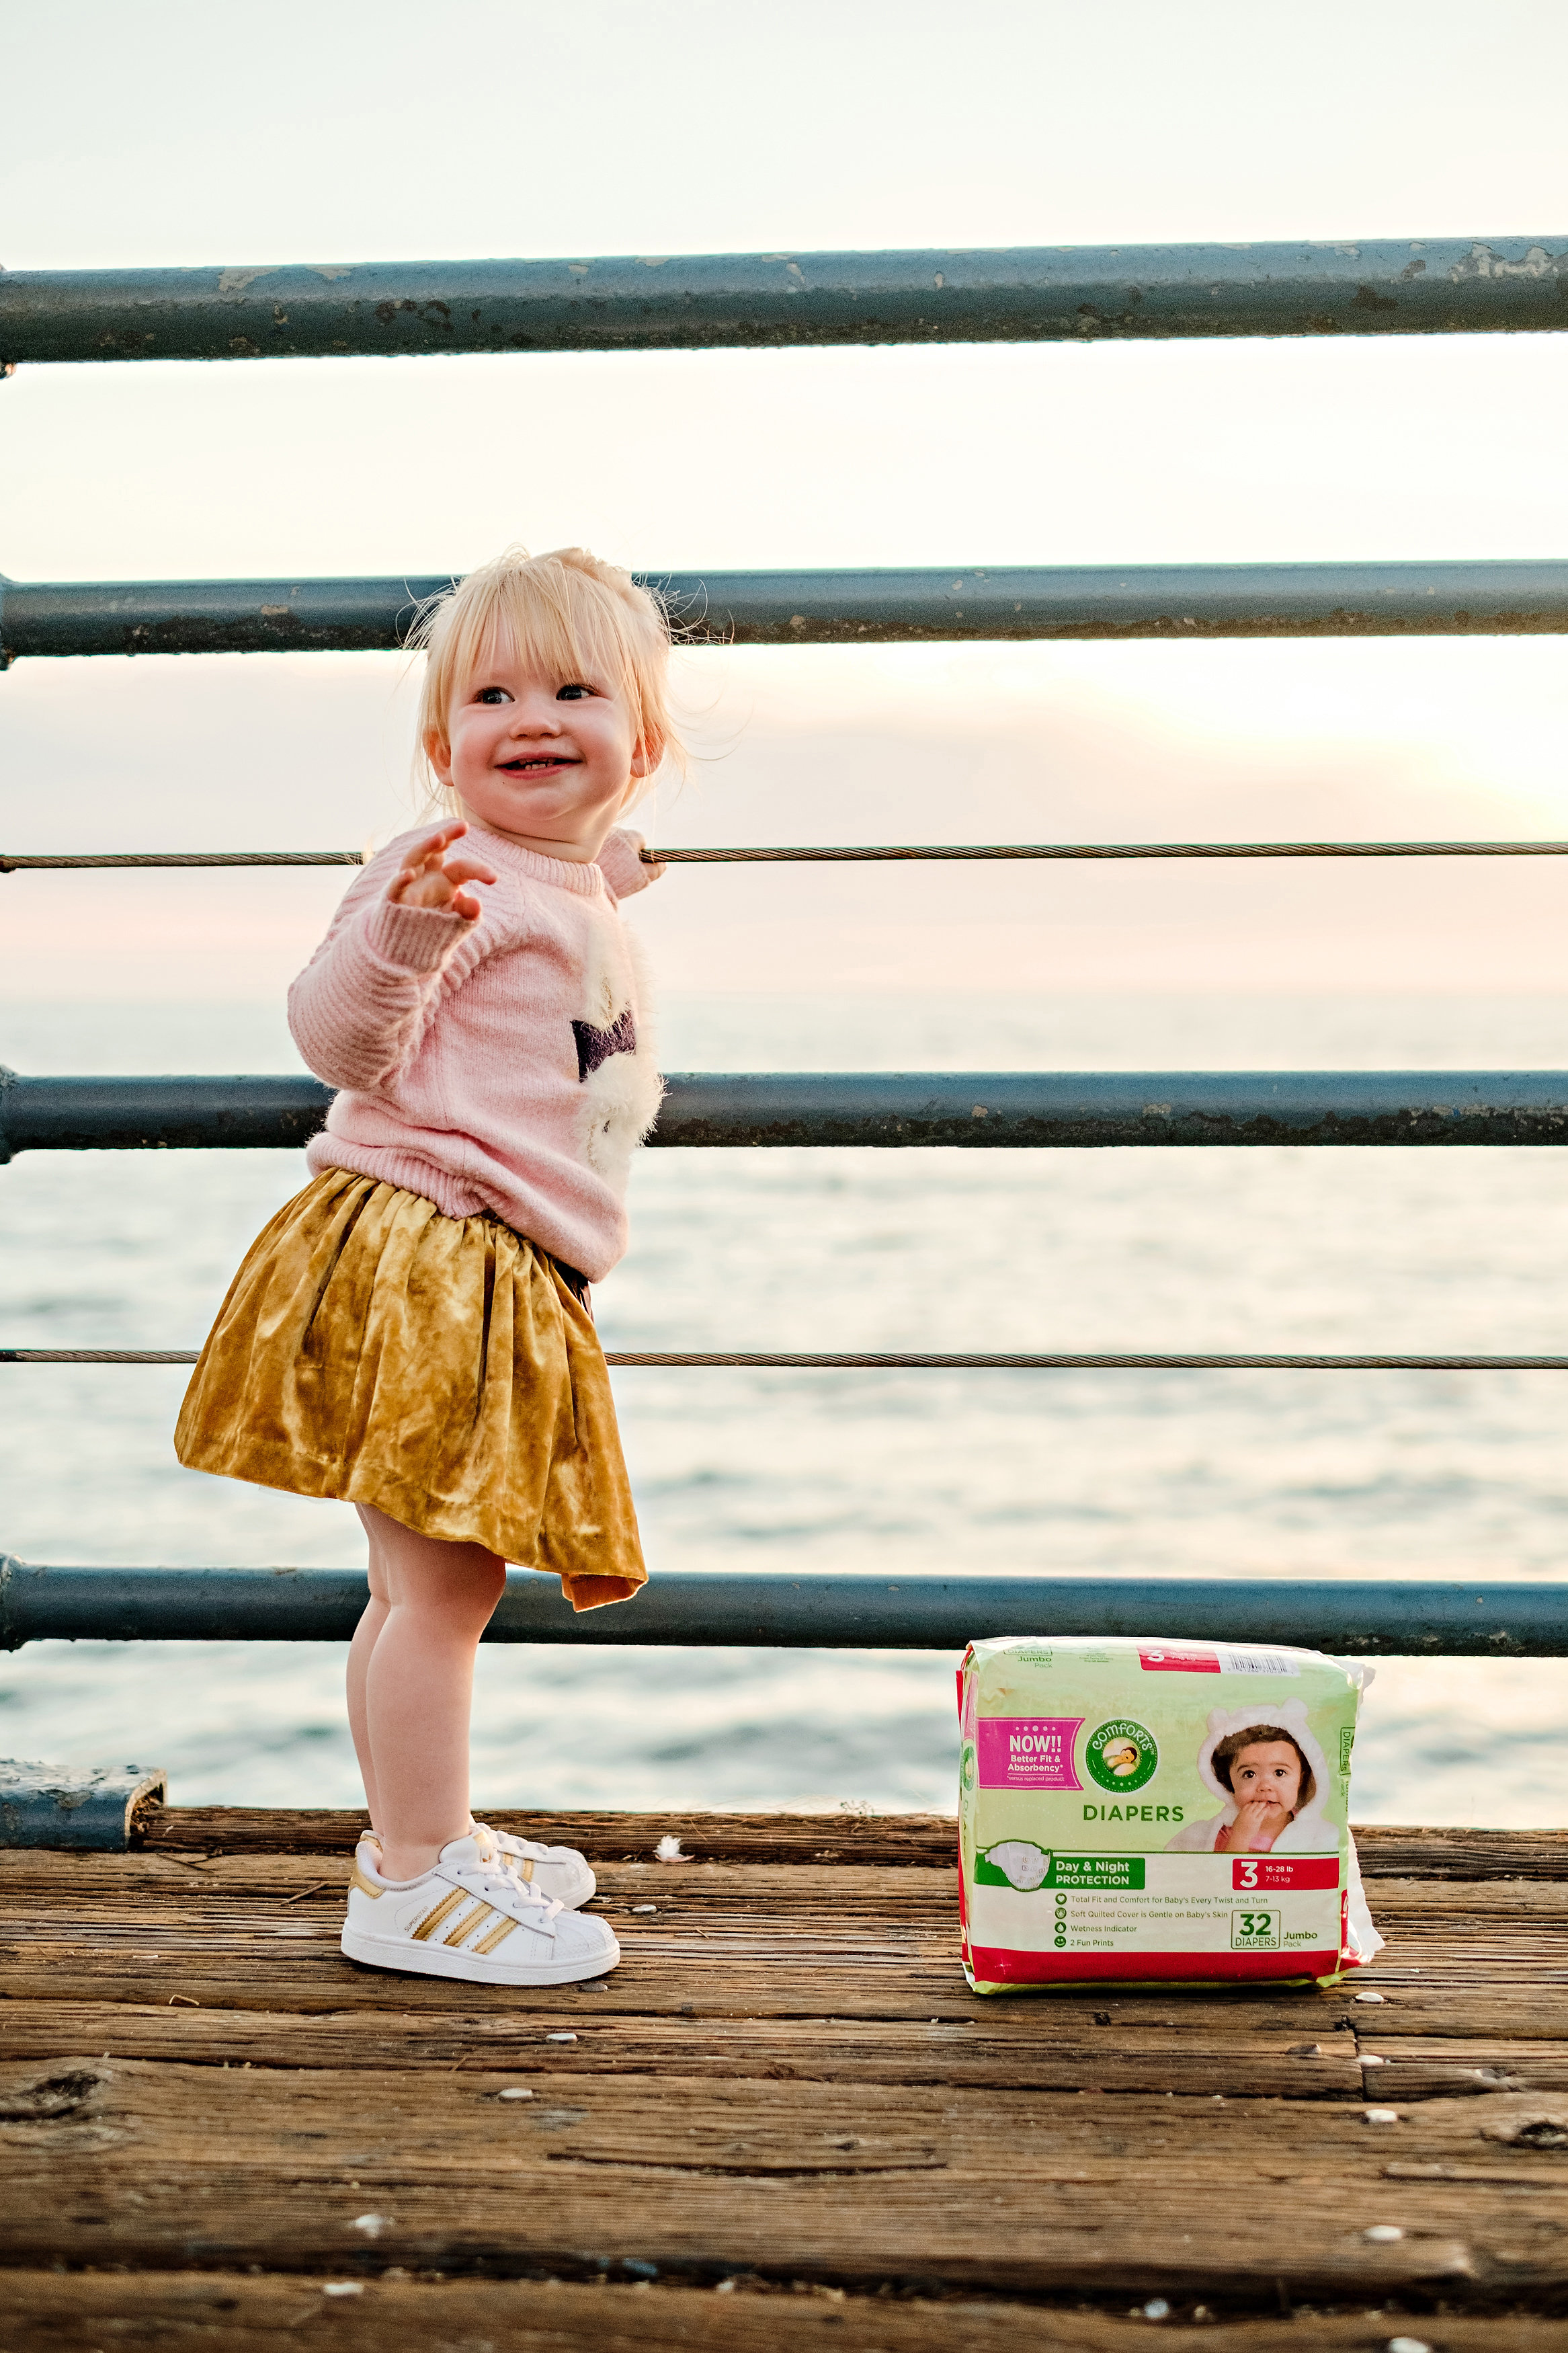 kroger comforts wipes - Kroger Comfort Wipes and Diapers by Atlanta mom blogger Happily Hughes